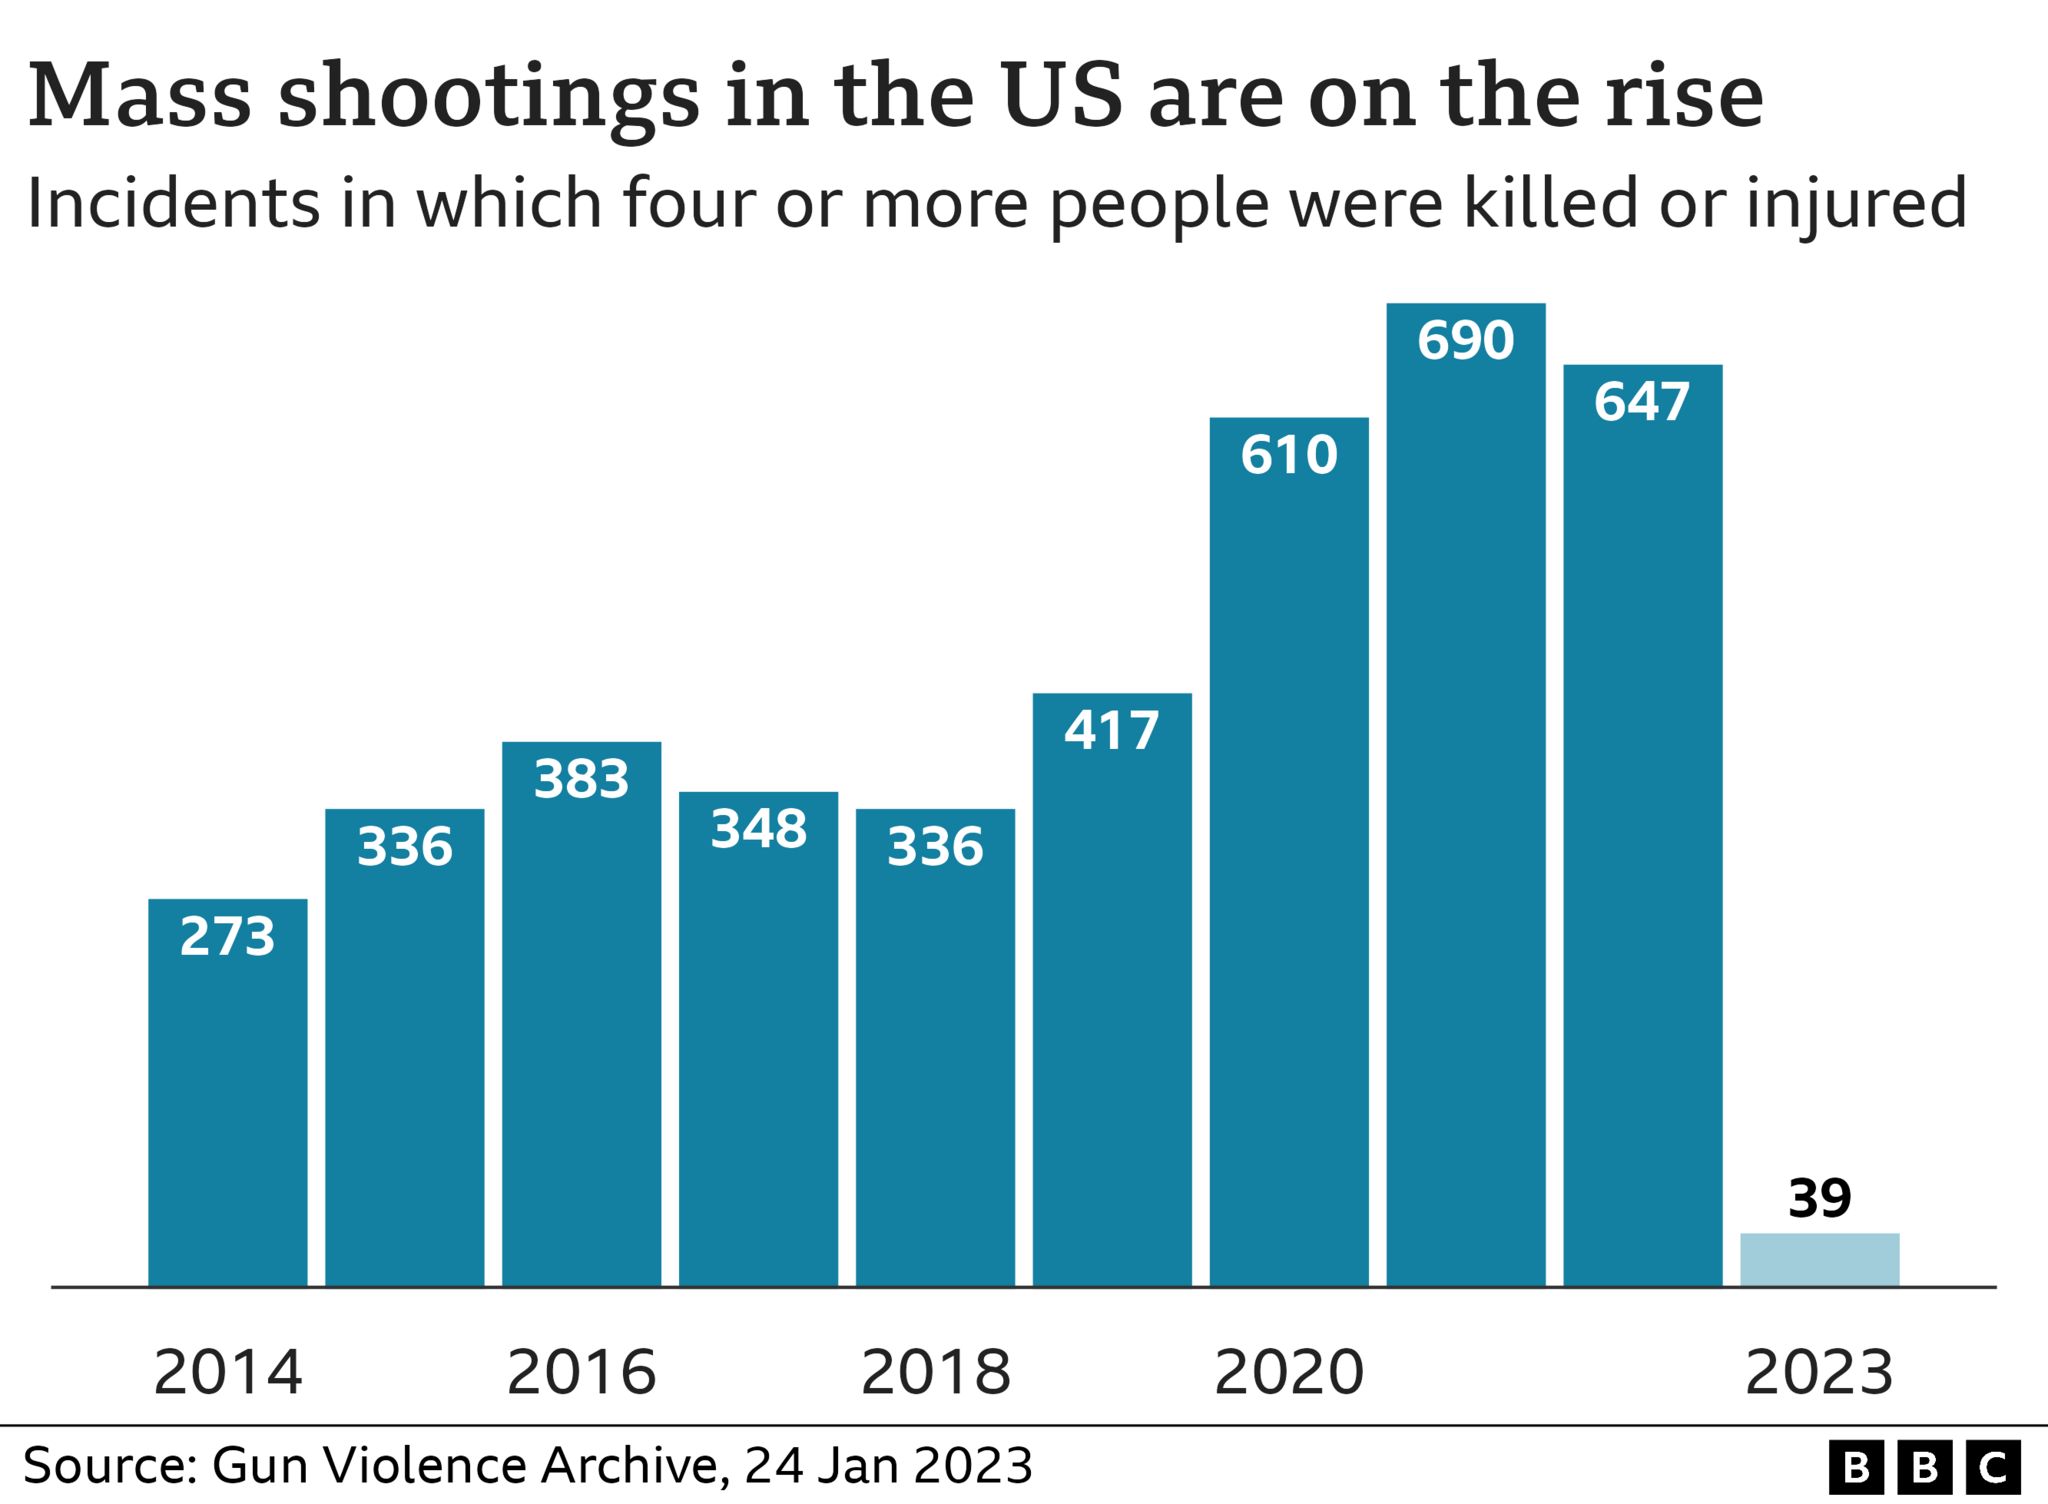 Mass shooting per year in the US